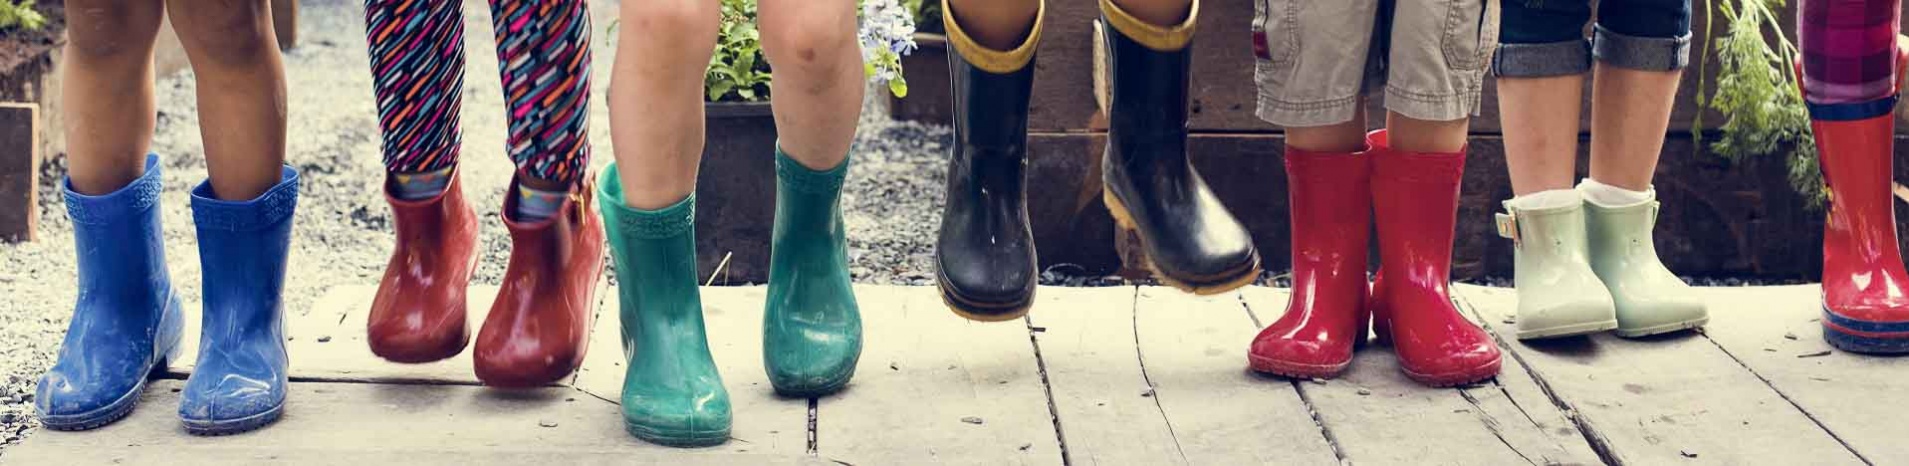 Many children having fun jumping in their brightly colored rainboots.